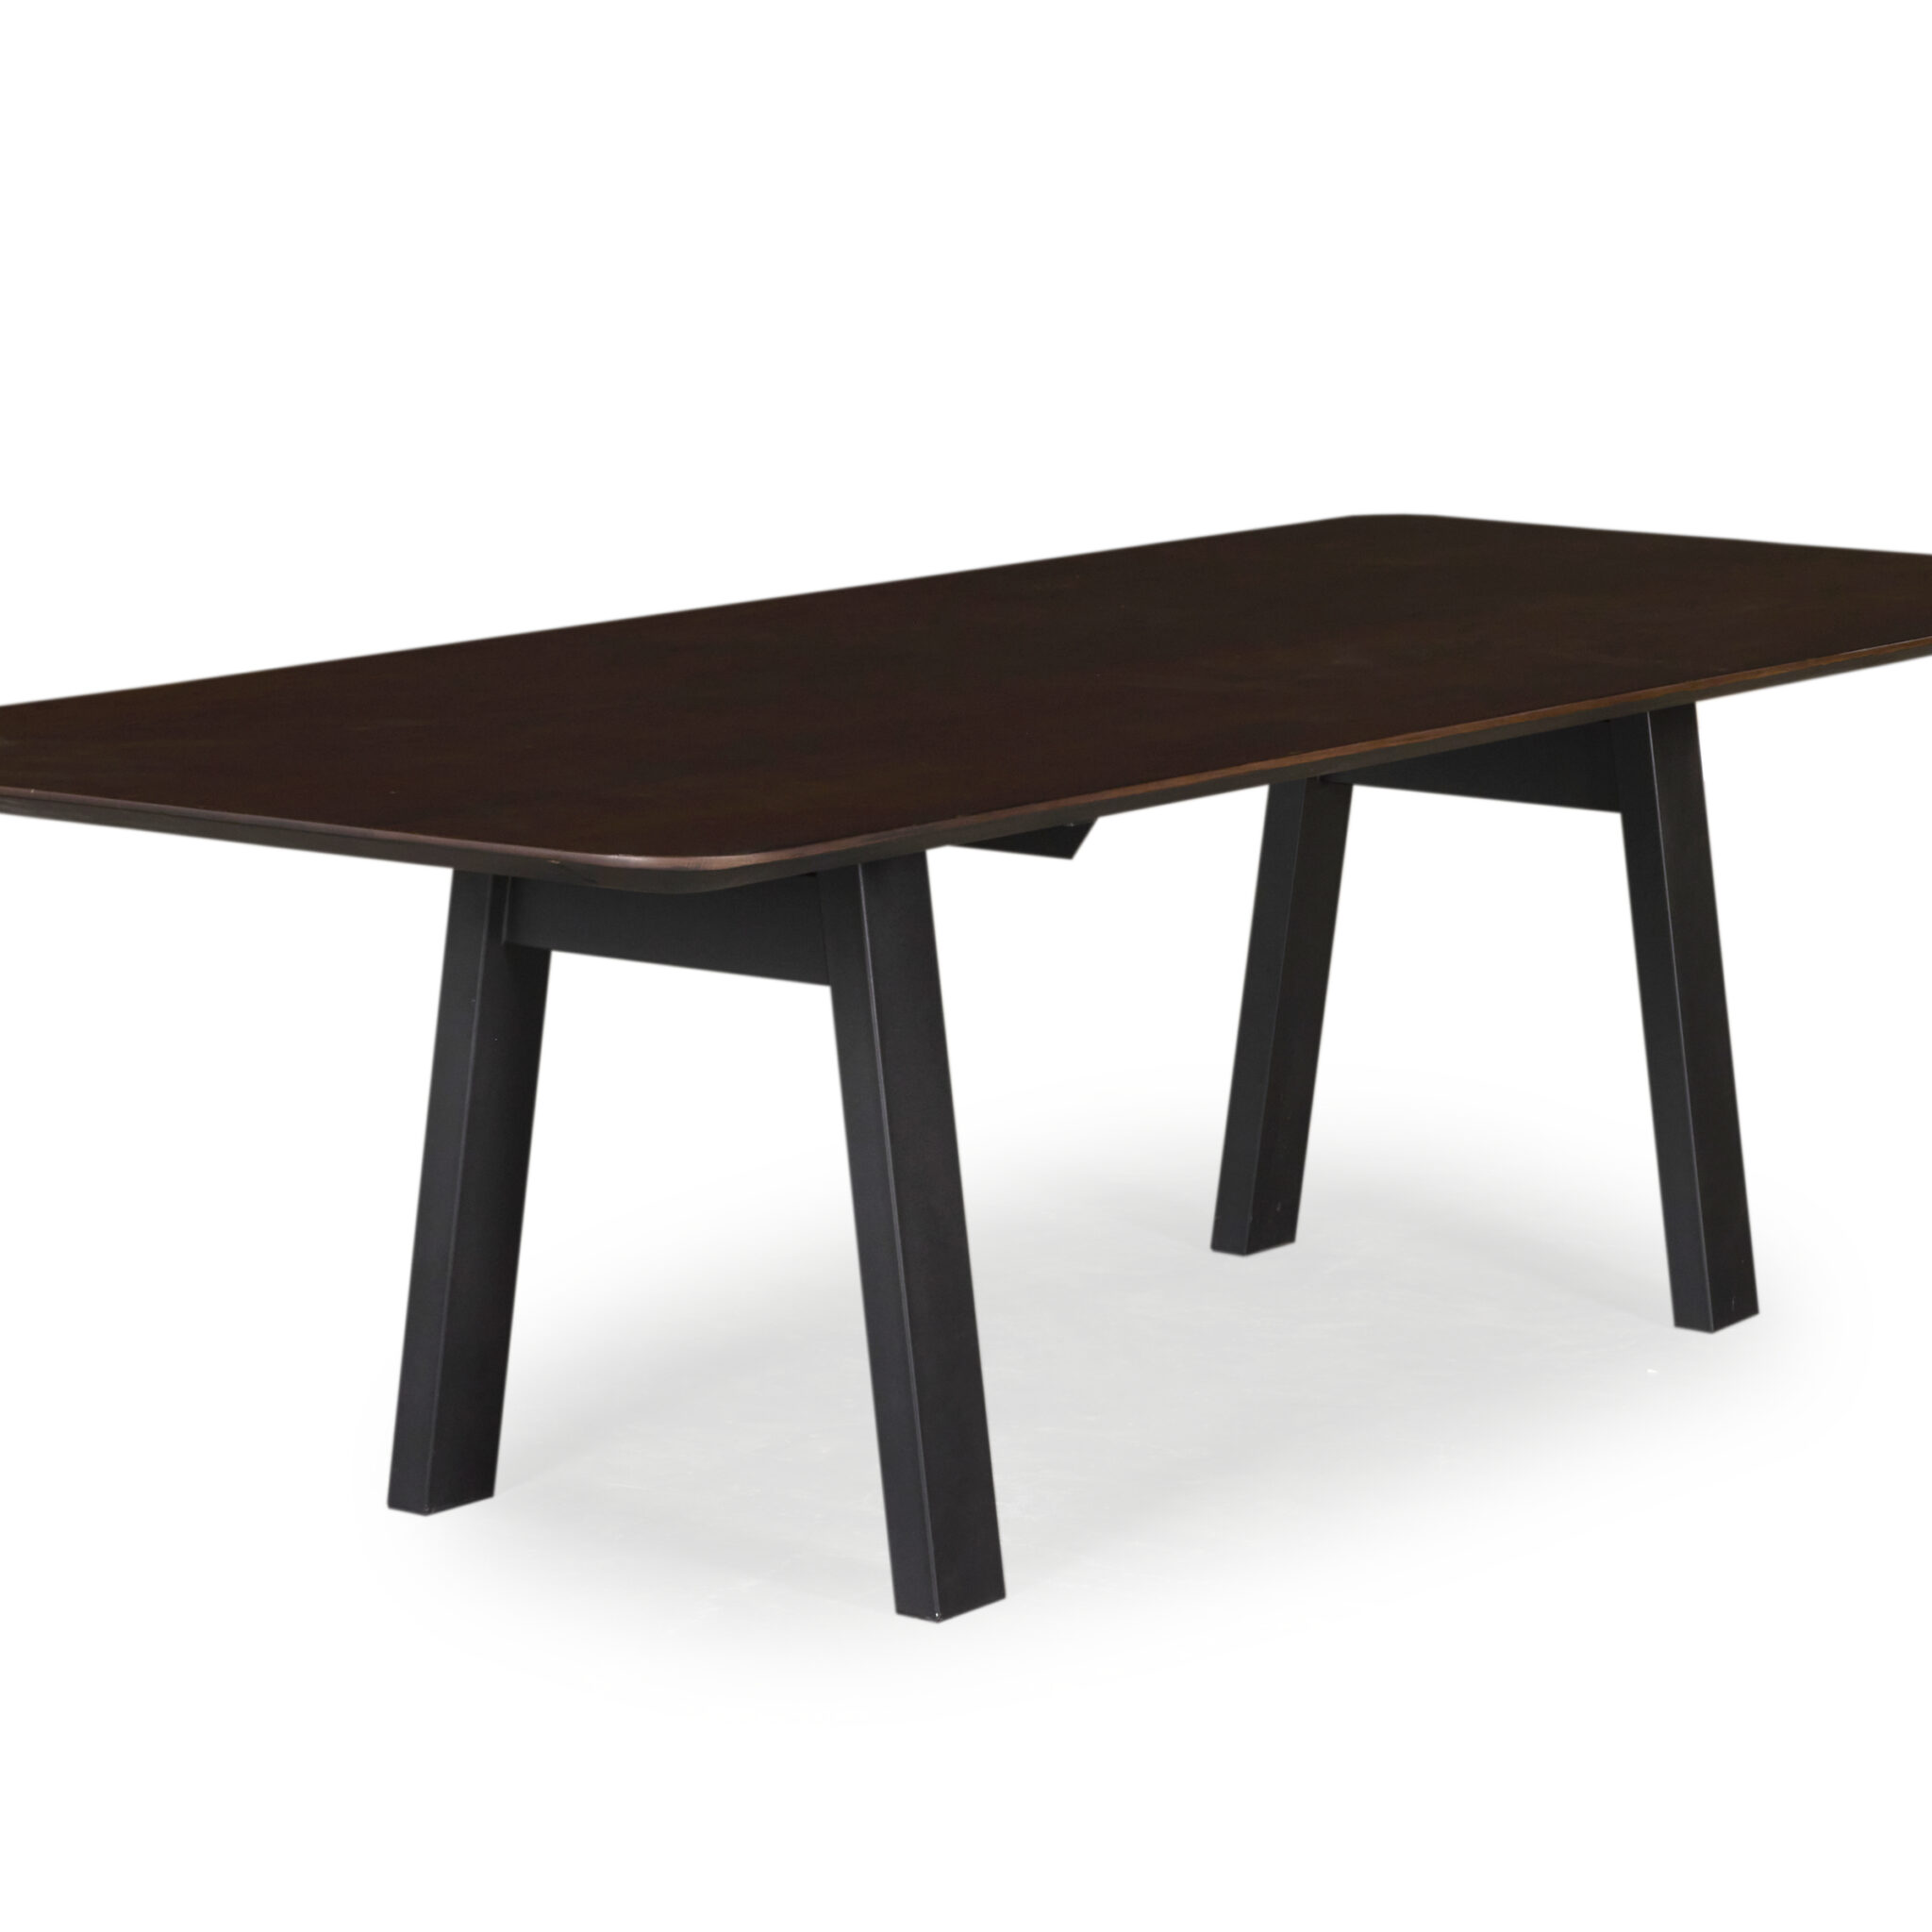 Nier Dining Table - American Oak - Brushed Black Finish - Curve Flat Ribbed Base - Dimensions: L: 3400mm x W: 1200mm x H: 750mm